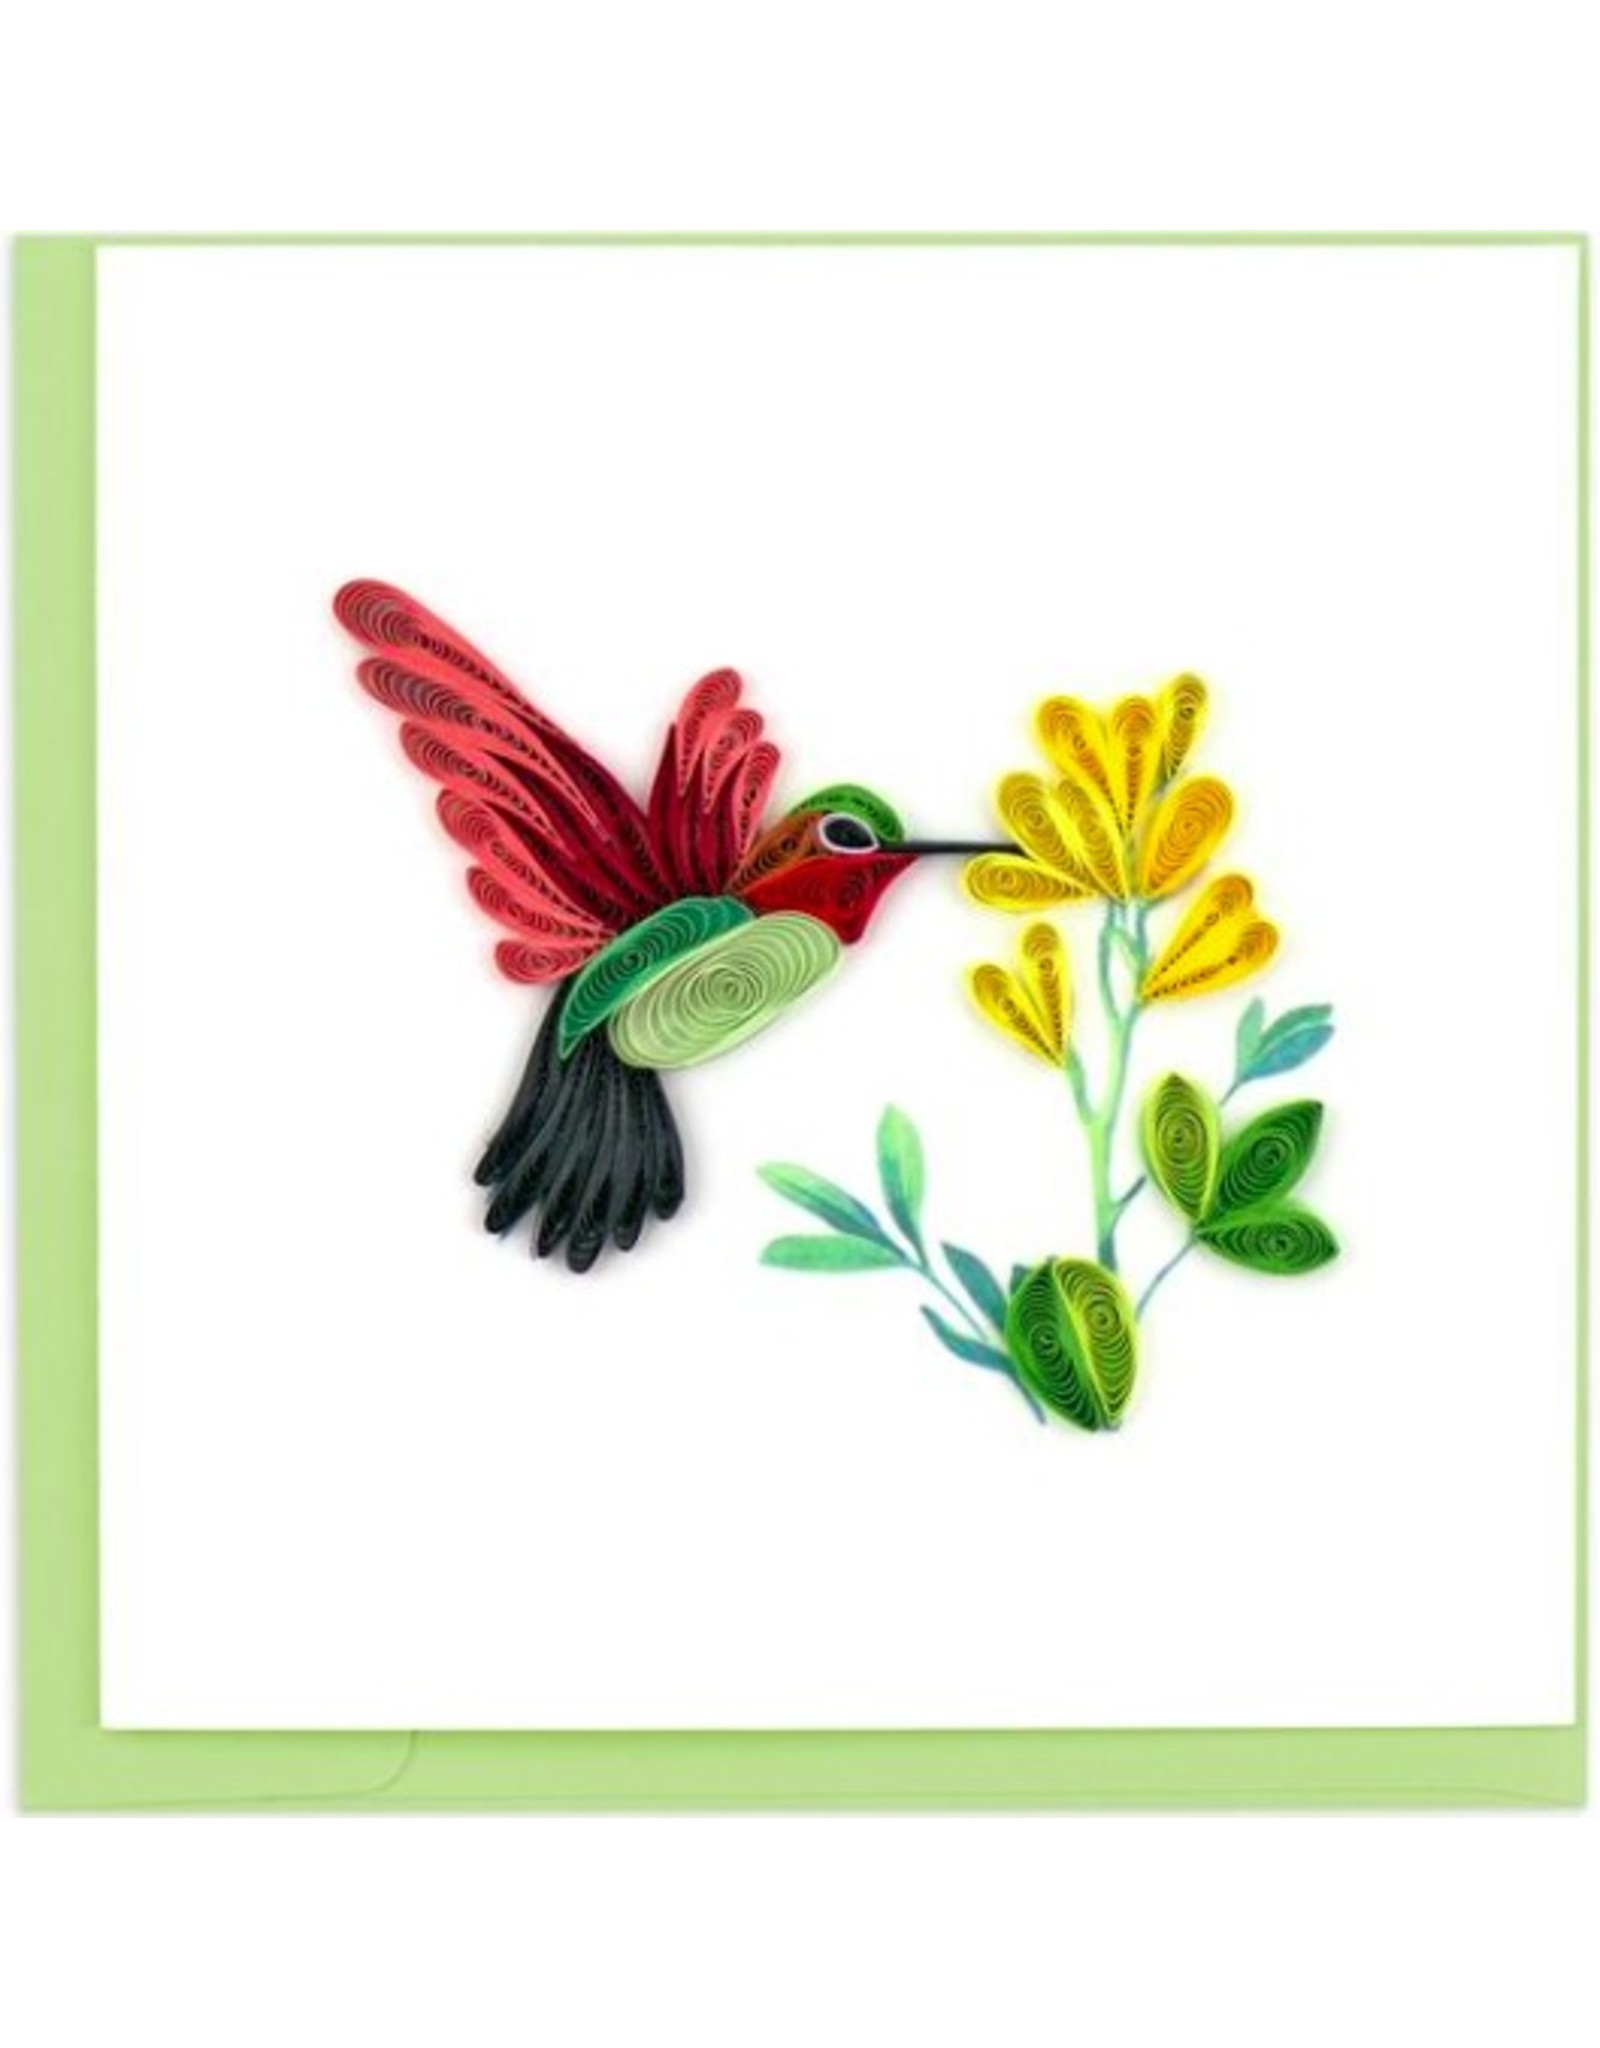 Trade roots Hummingbird Quilling Card with Yellow Flower,  Vietnam